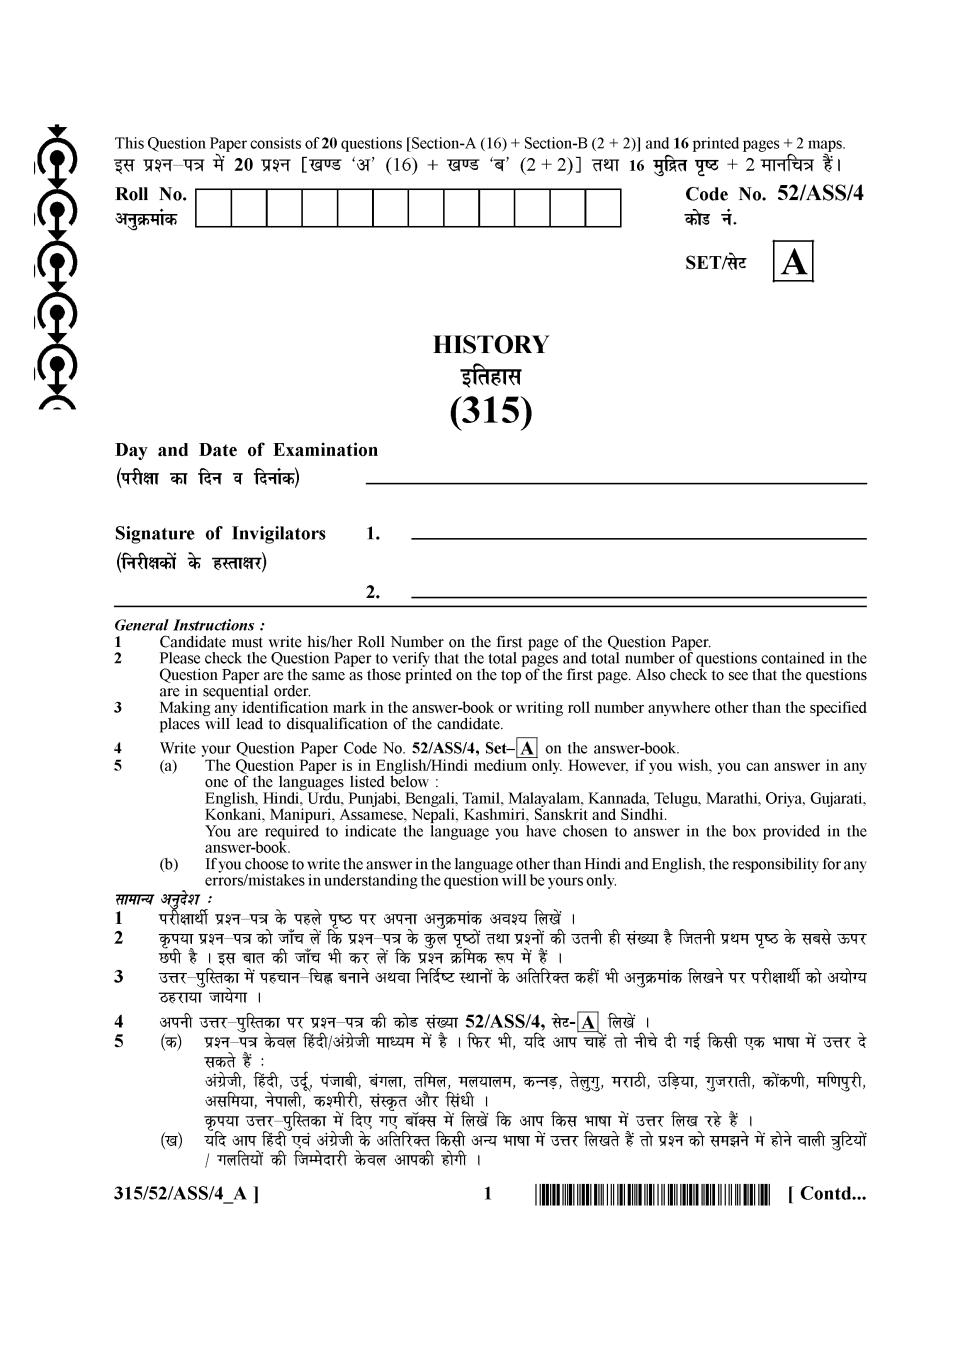 NIOS Class 12 Question Paper Apr 2016 - History - Page 1